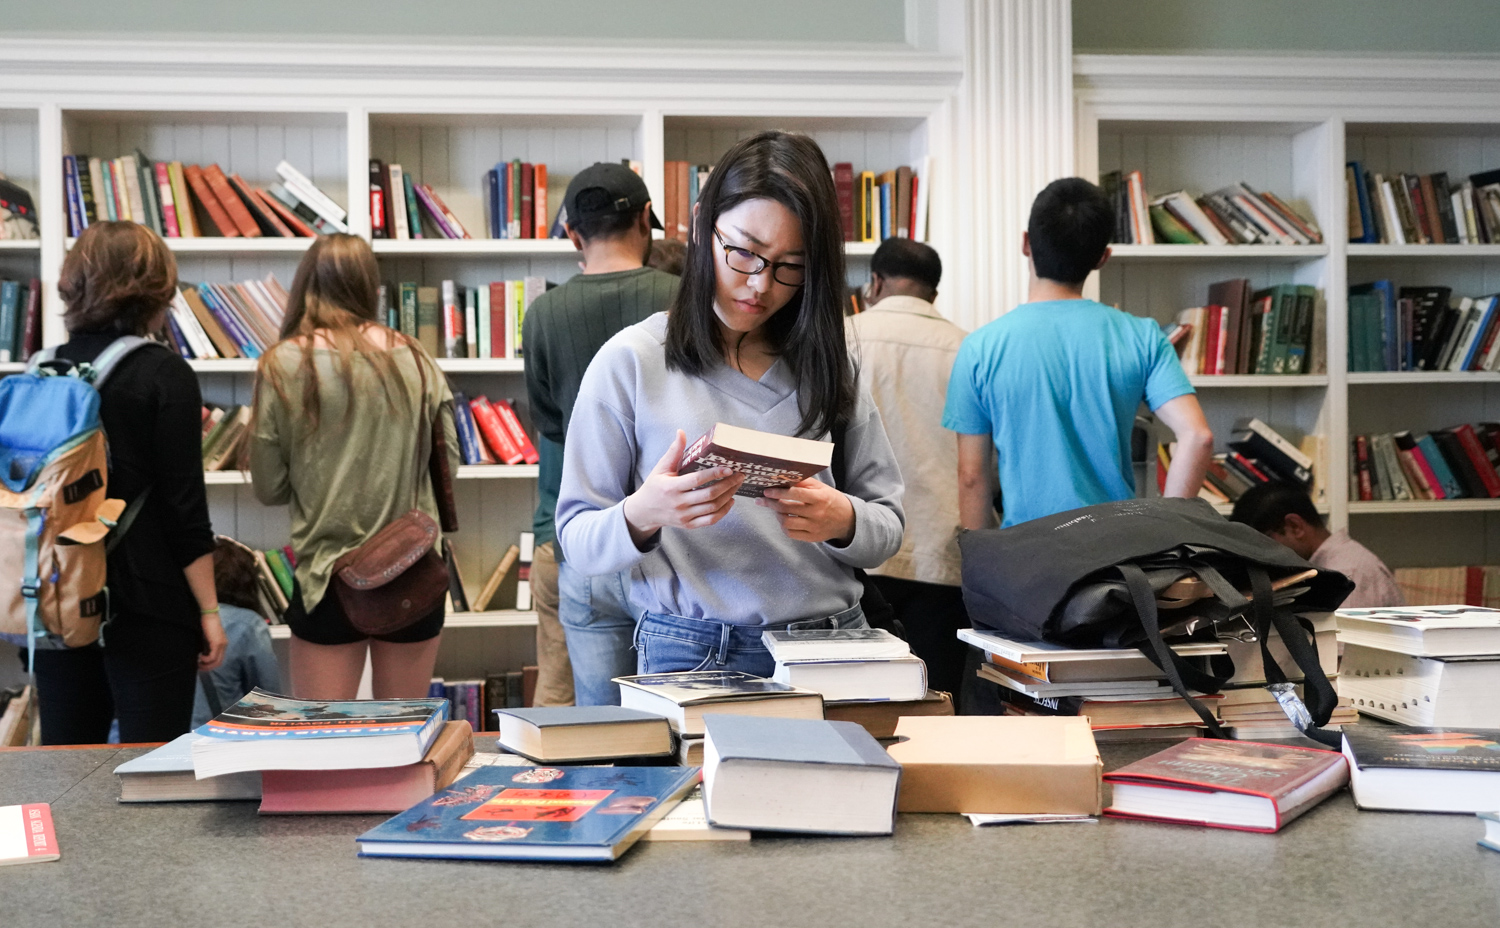 Visitors browse the $1 book sale at Doe Library on Cal Day, April 21, 2018.